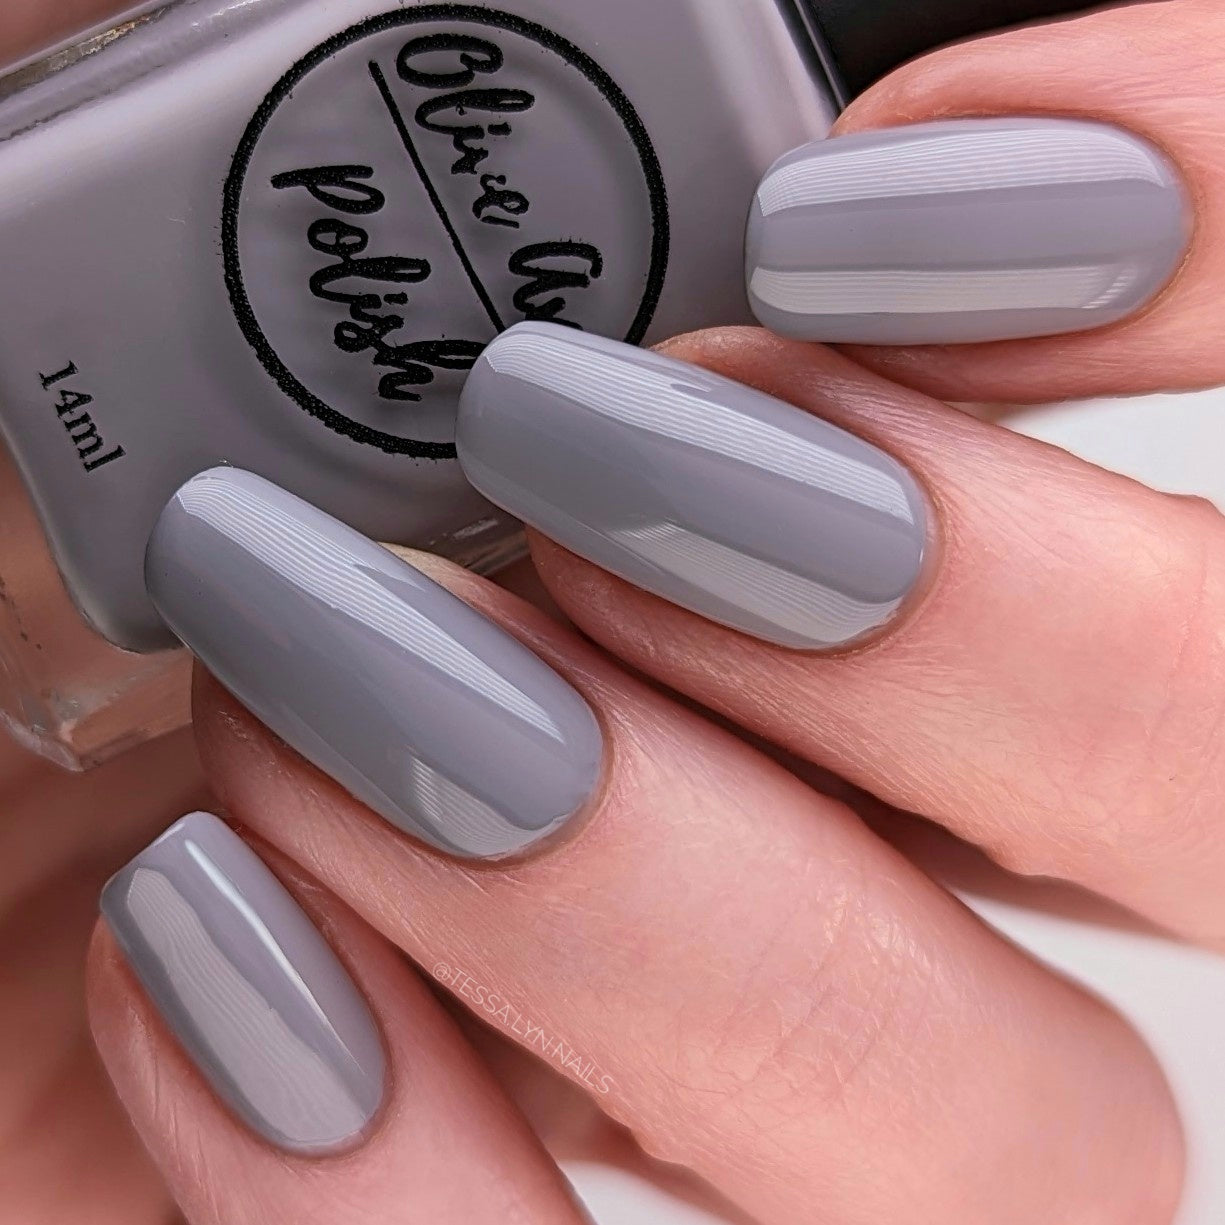 10 Spring Nail Polish Color Trends You're About To Be Obsessed With